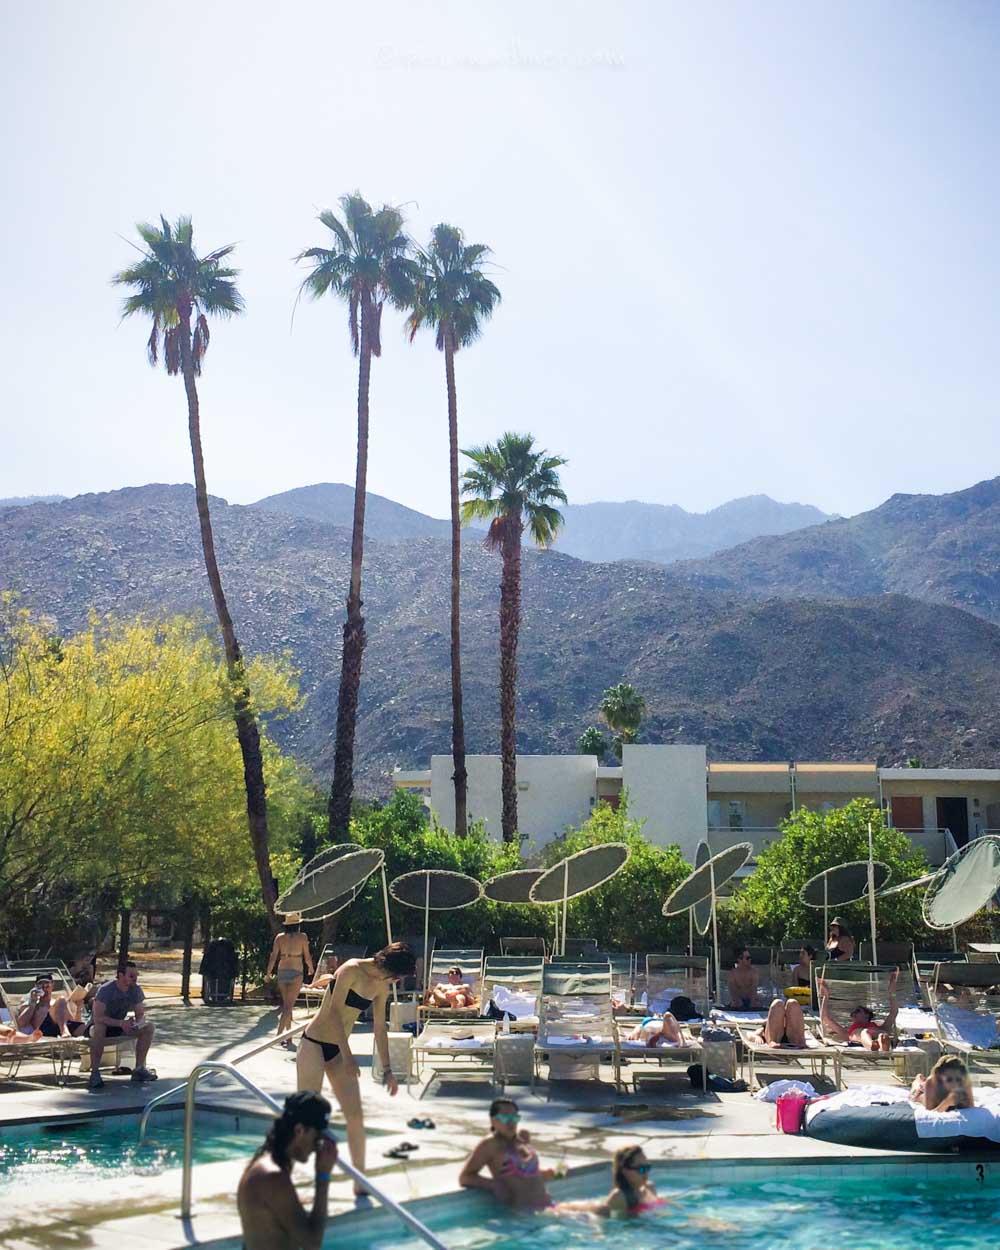 Ace Hotel Palm Springs Review Pool Day Pass Swim Club Rates